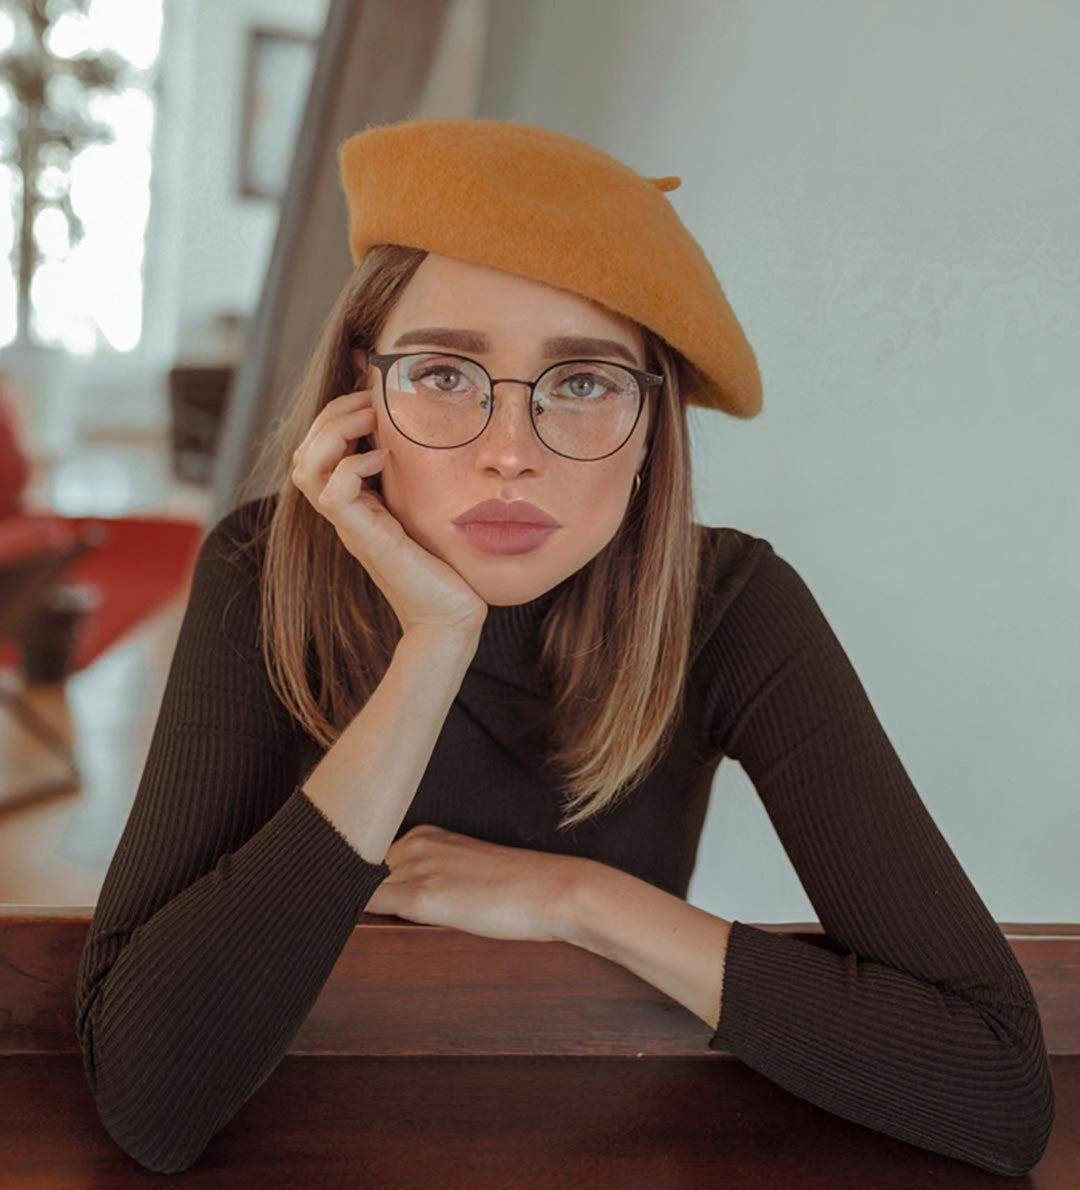 Woman with orange beret and thin eyeglasses resting her head in one hand